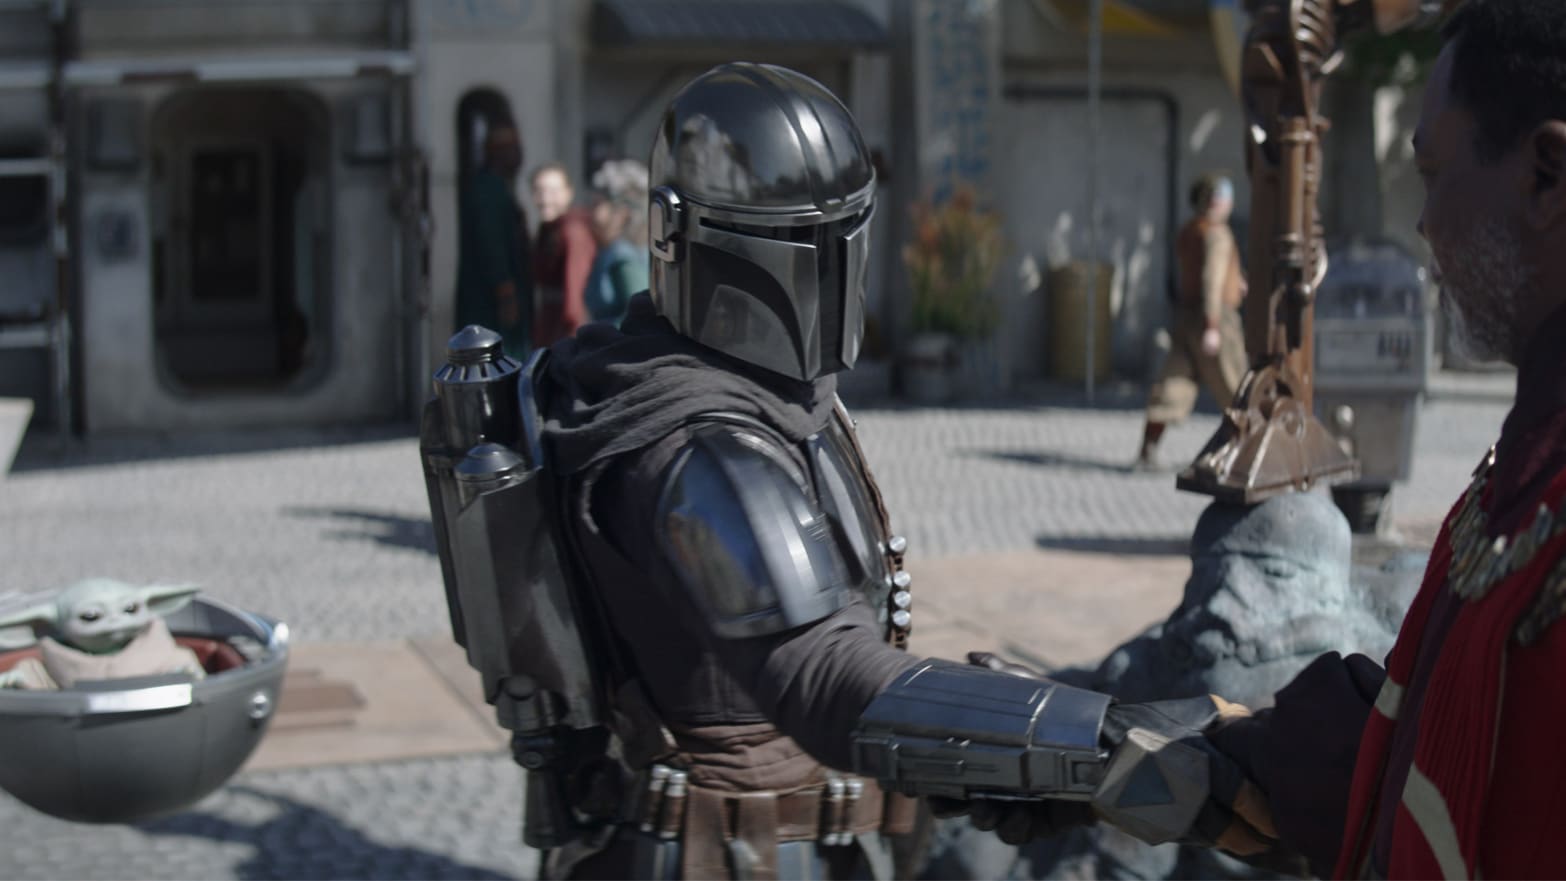 5 questions we have after watching The Mandalorian episode 2